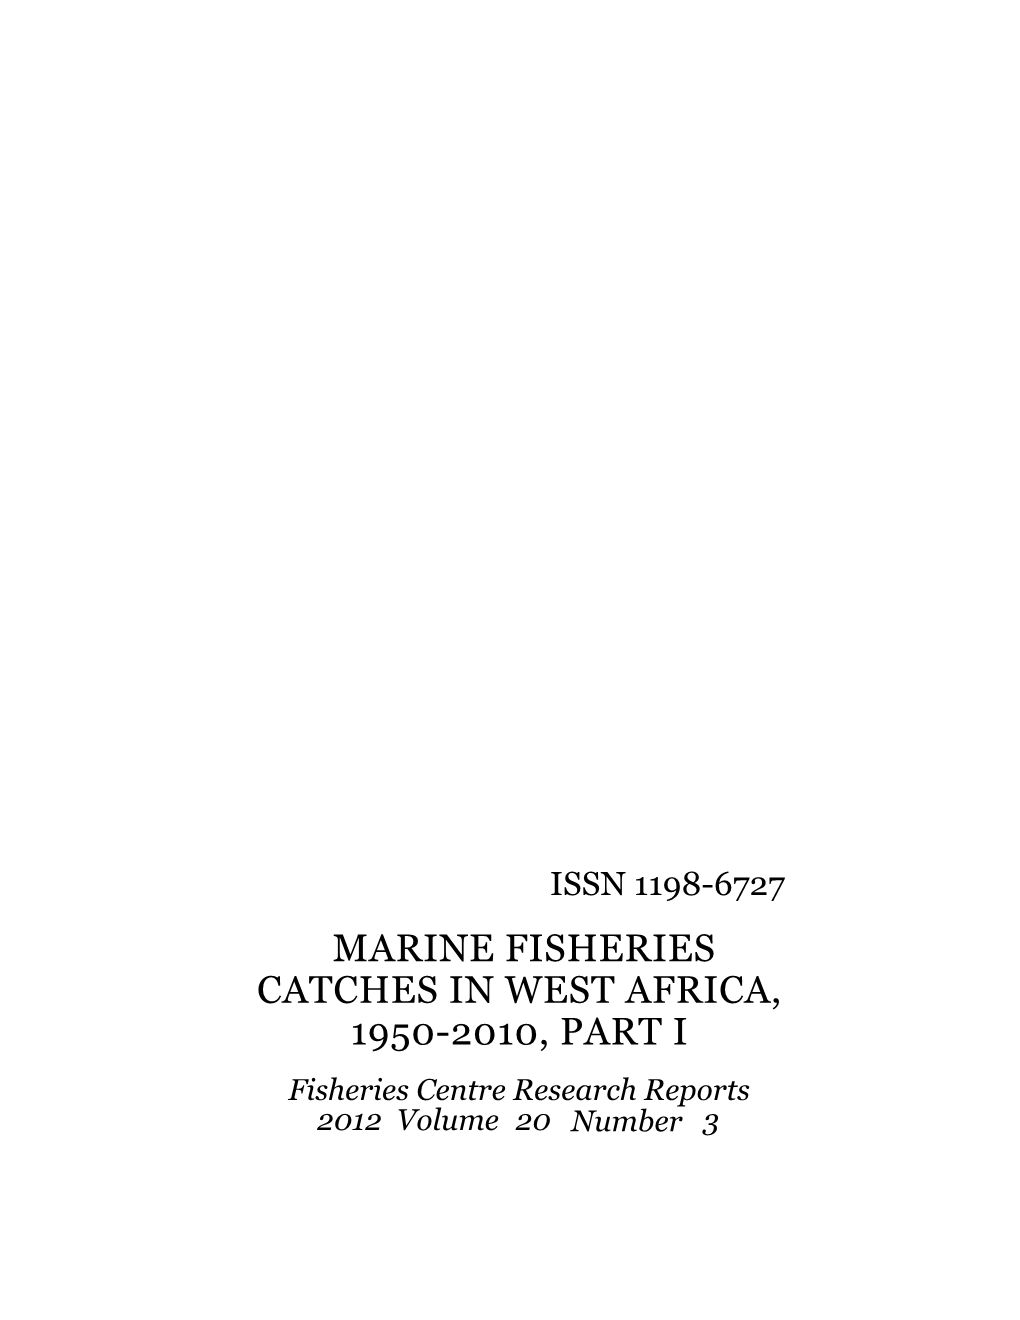 MARINE FISHERIES CATCHES in WEST AFRICA, 1950-2010, PART I Fisheries Centre Research Reports 2012 Volume 20 Number 3